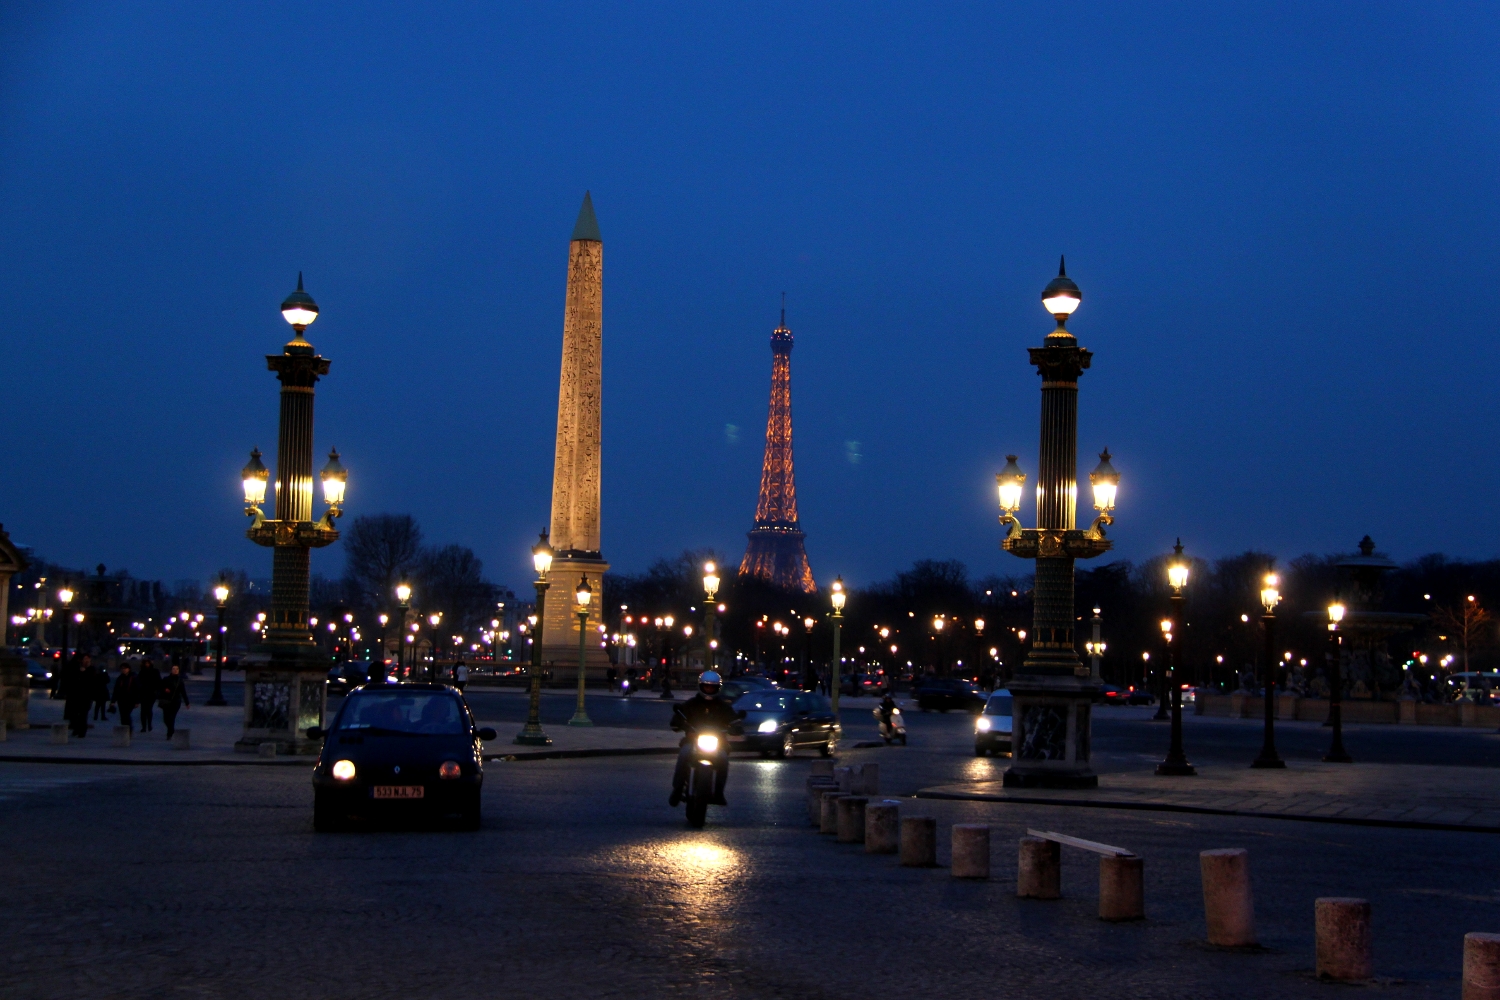 The Luxor Obelisque (Obelisk) in Paris with the Eiffel Tower